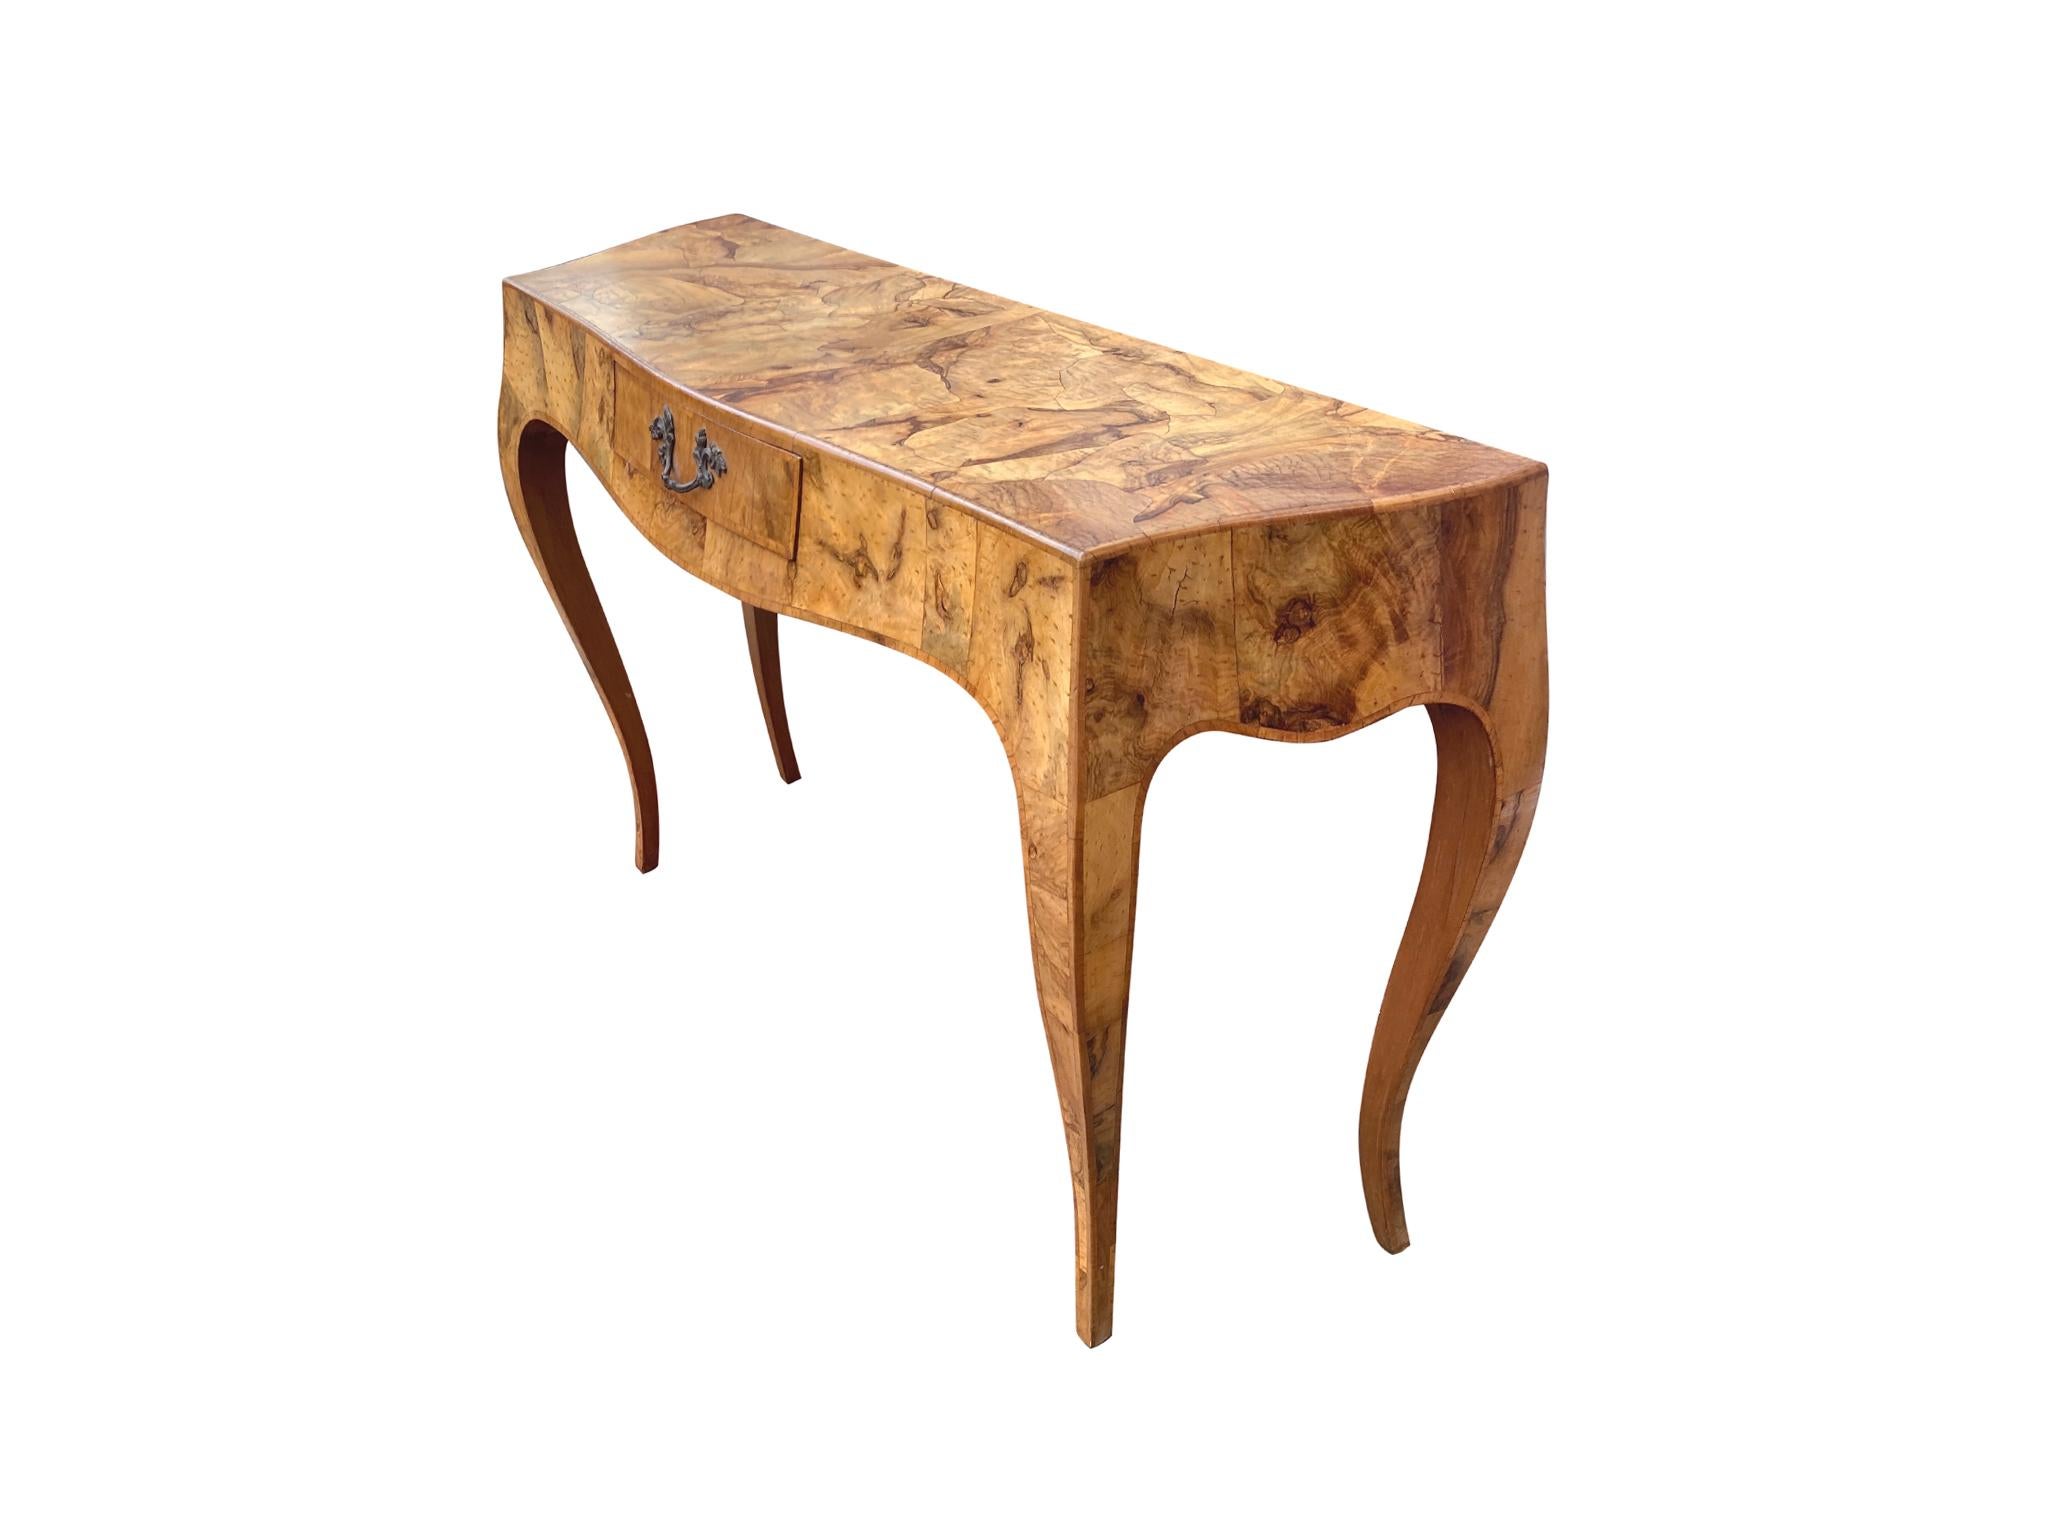 talian console table crafted in the Neoclassical style, late 20th century. Rich burl-wood veneer covers the surface creating a rich patchwork design. Other noteworthy features we love are the bowed front and curved legs. The single drawer with a